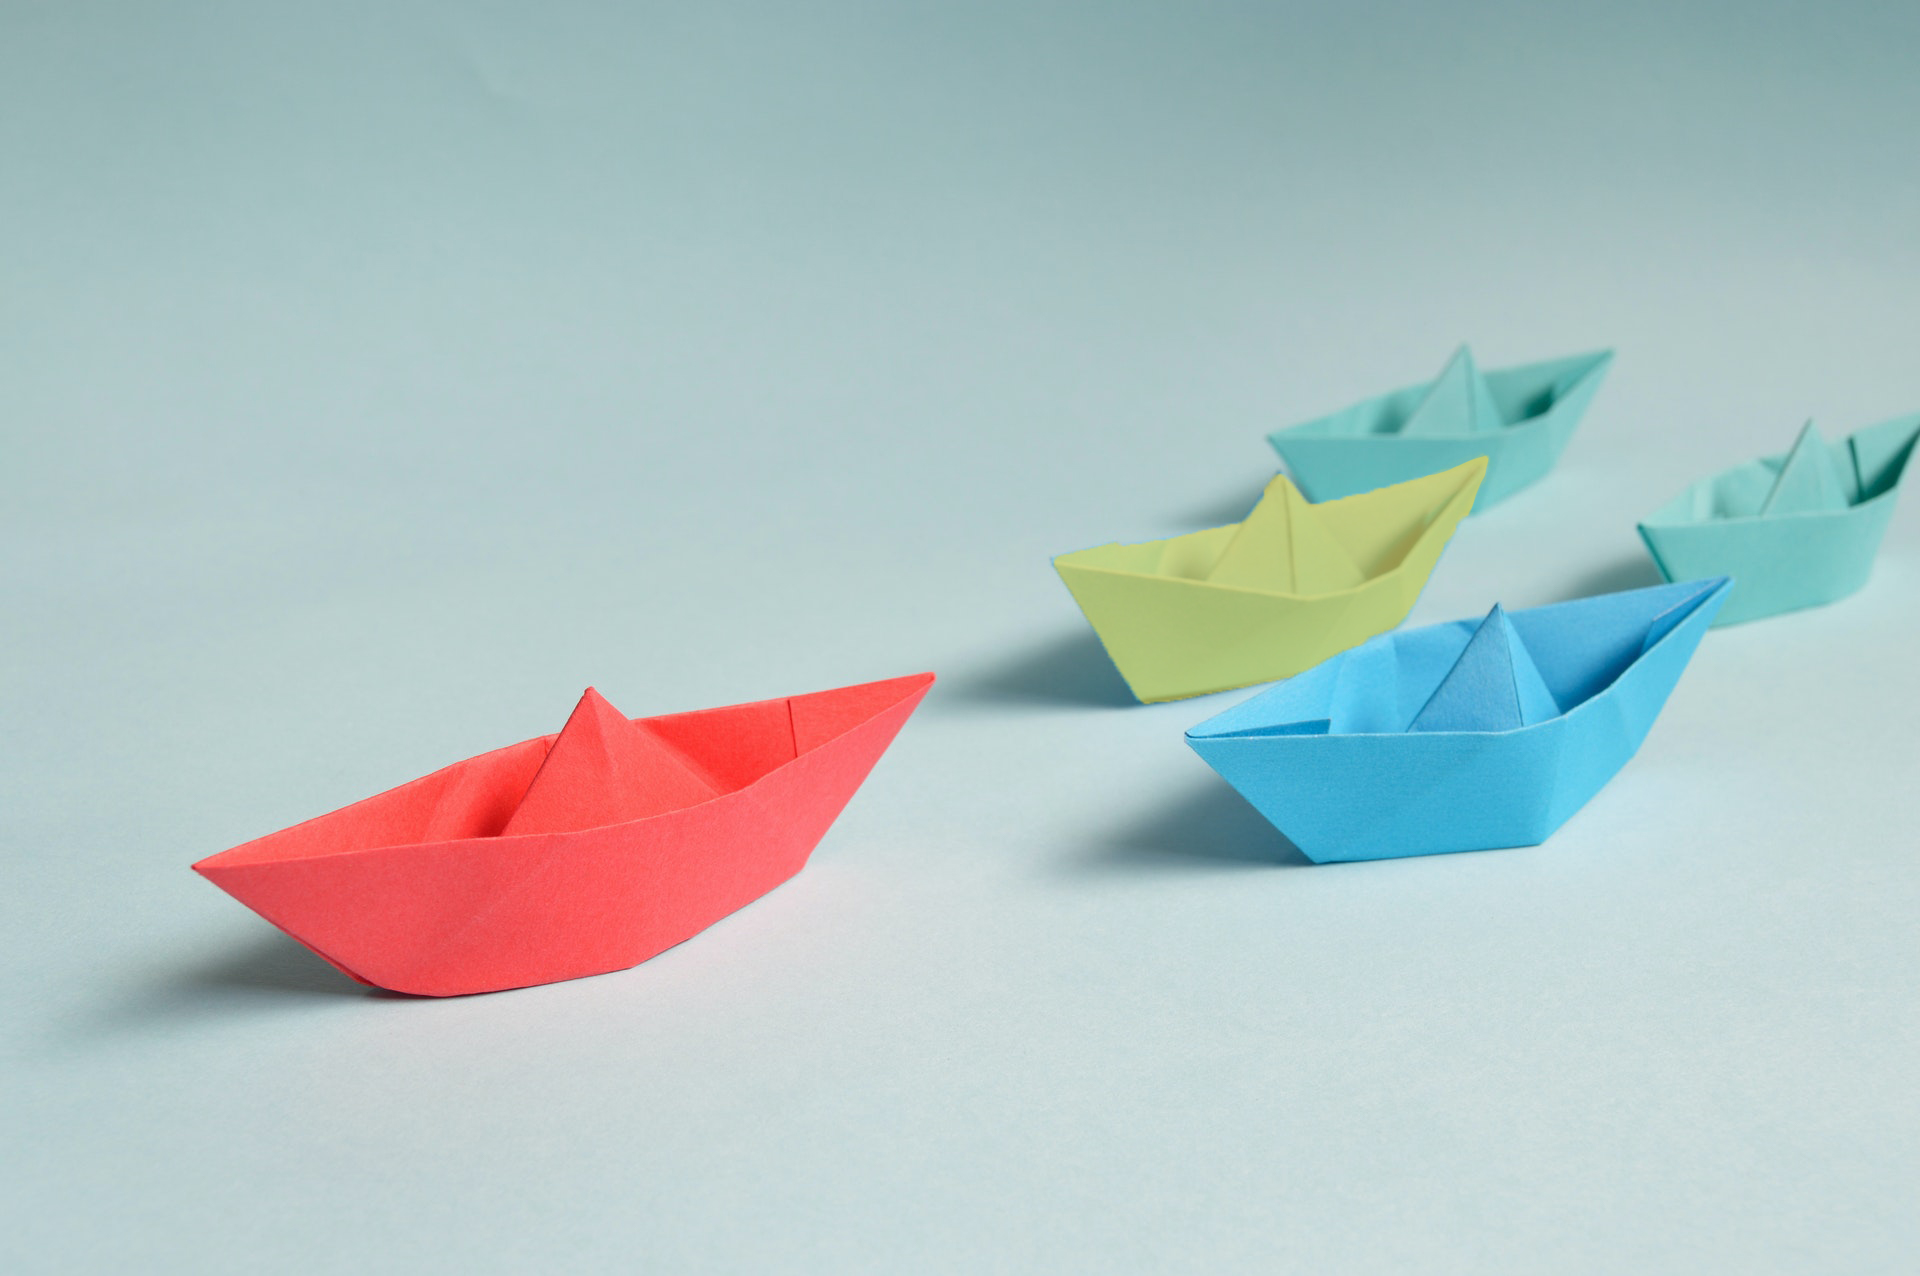 5 paper ships in red, yellow, blue and green navigating on a plain background - resilient leadership development programs help organizations navigate change with stronger team management